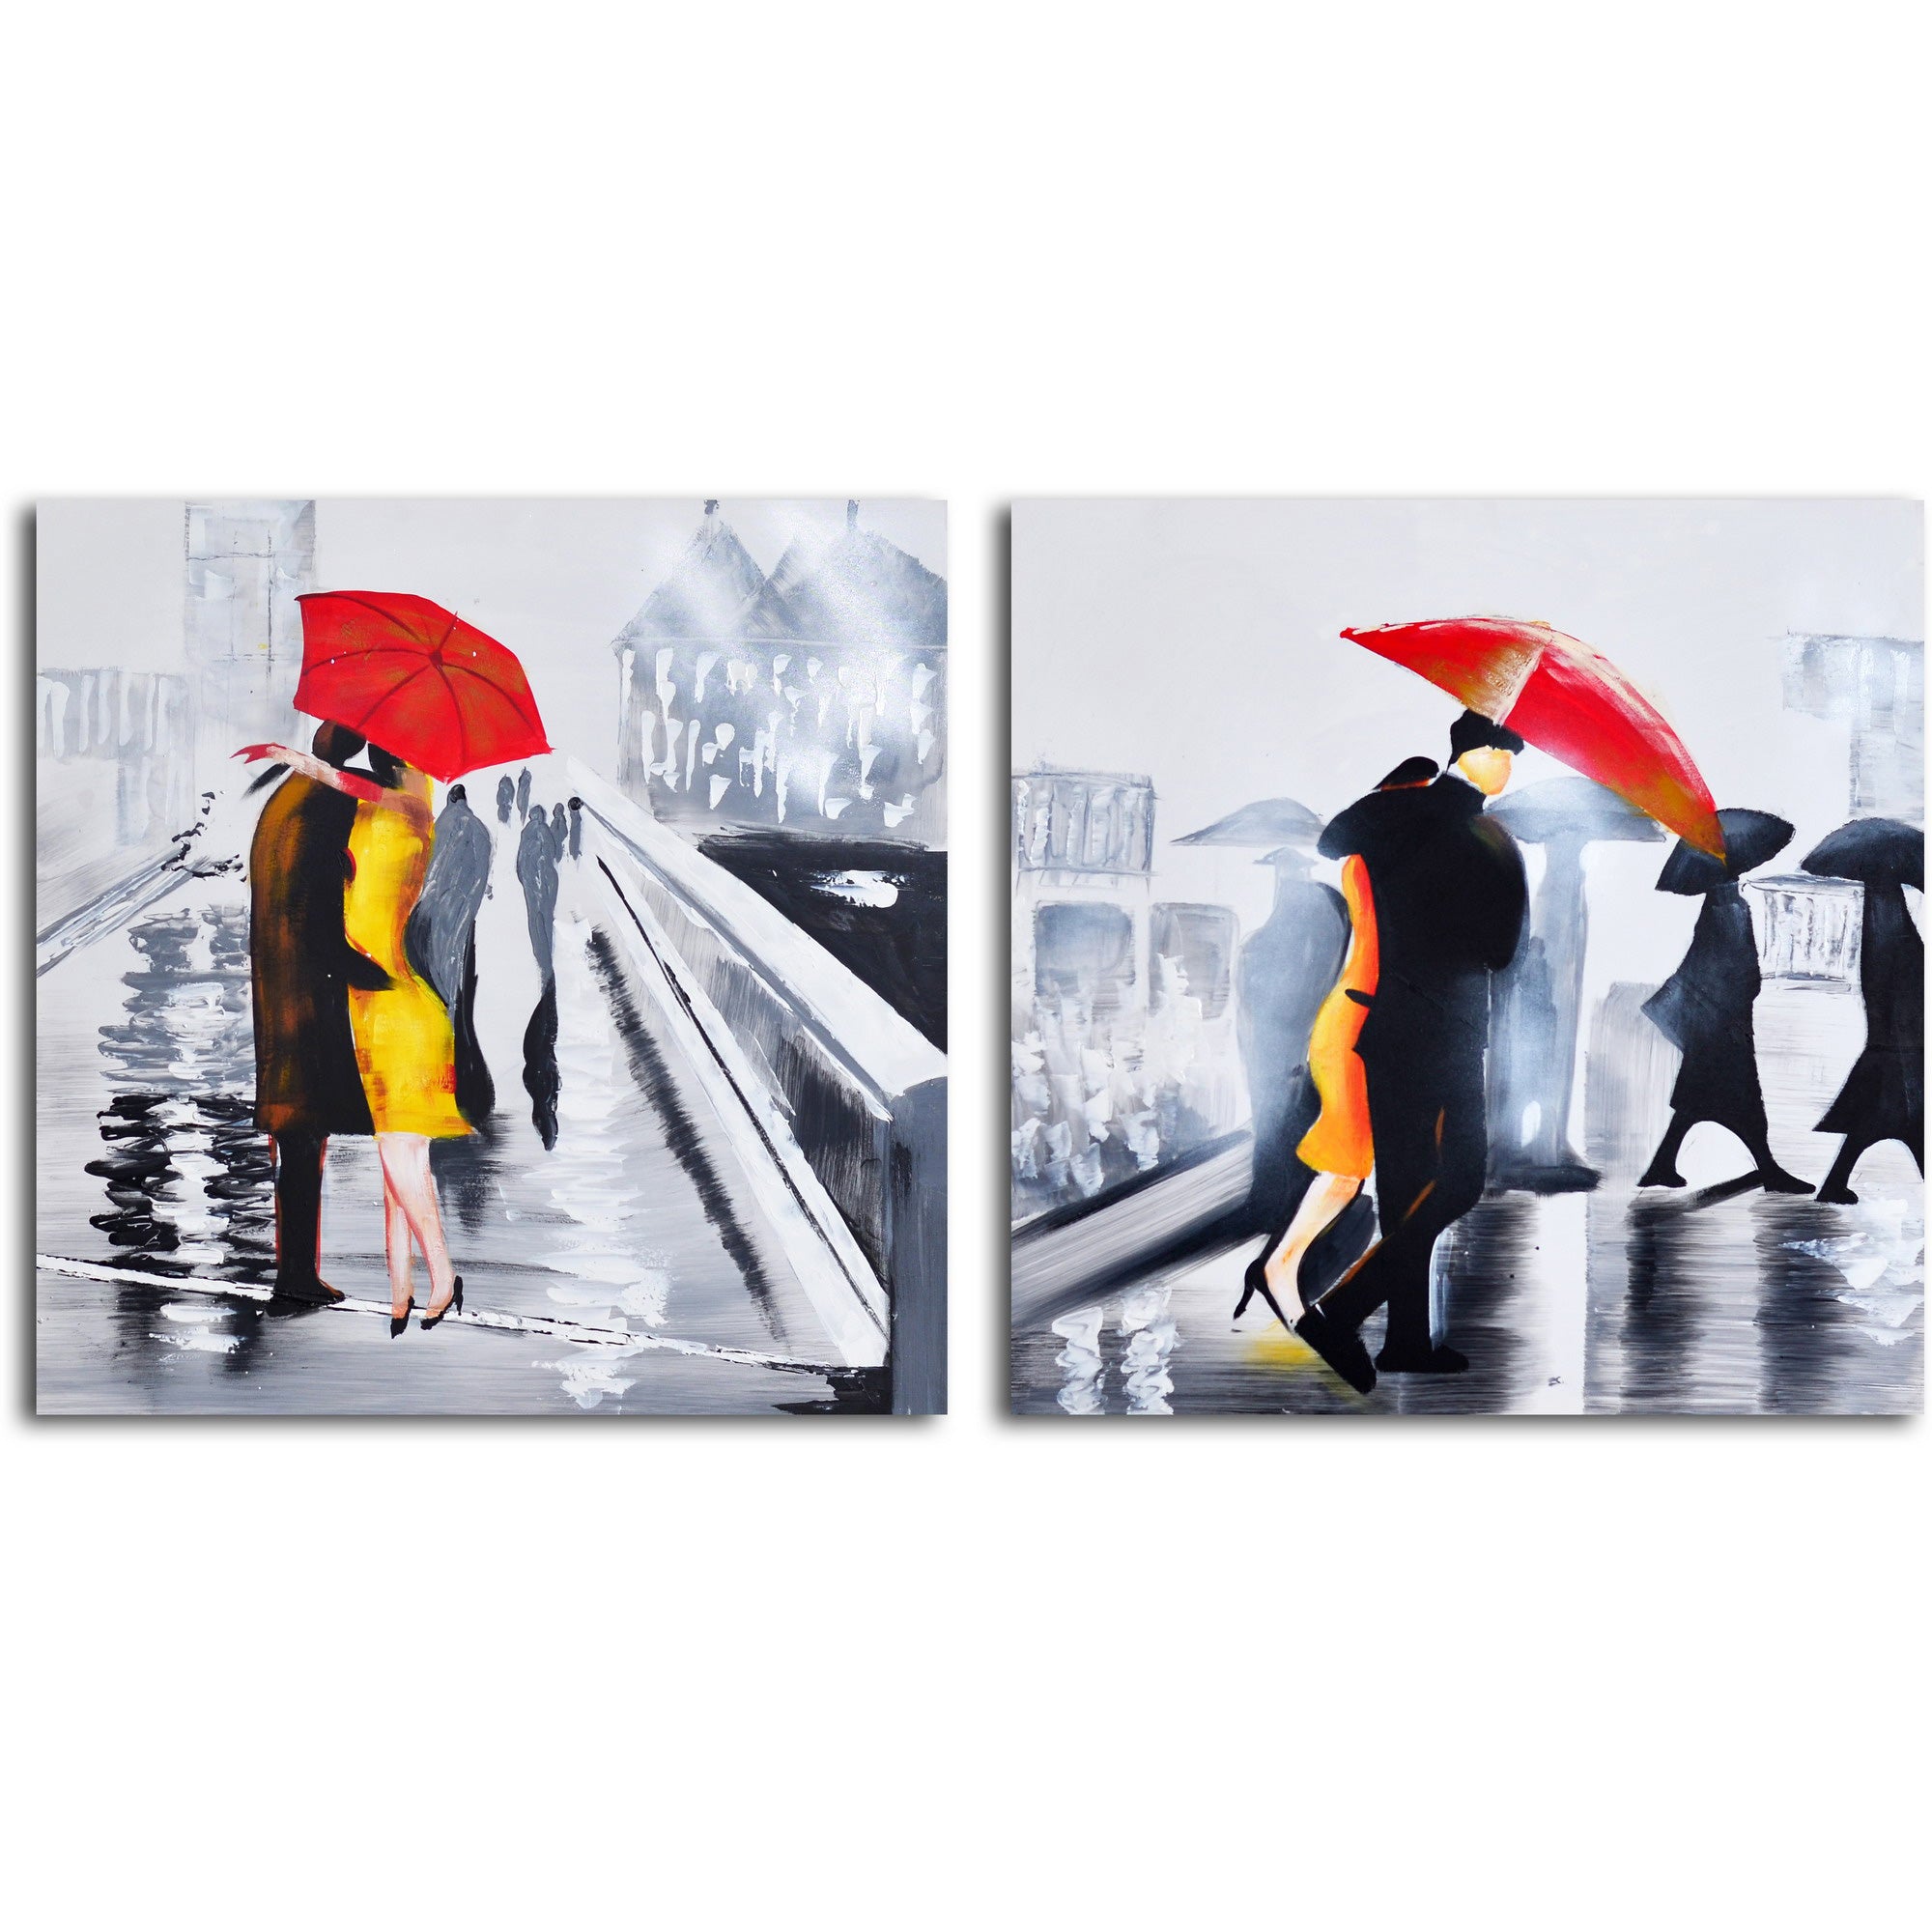 Hand painted "Under the Red Umbrella" 2 Piece Canvas Set